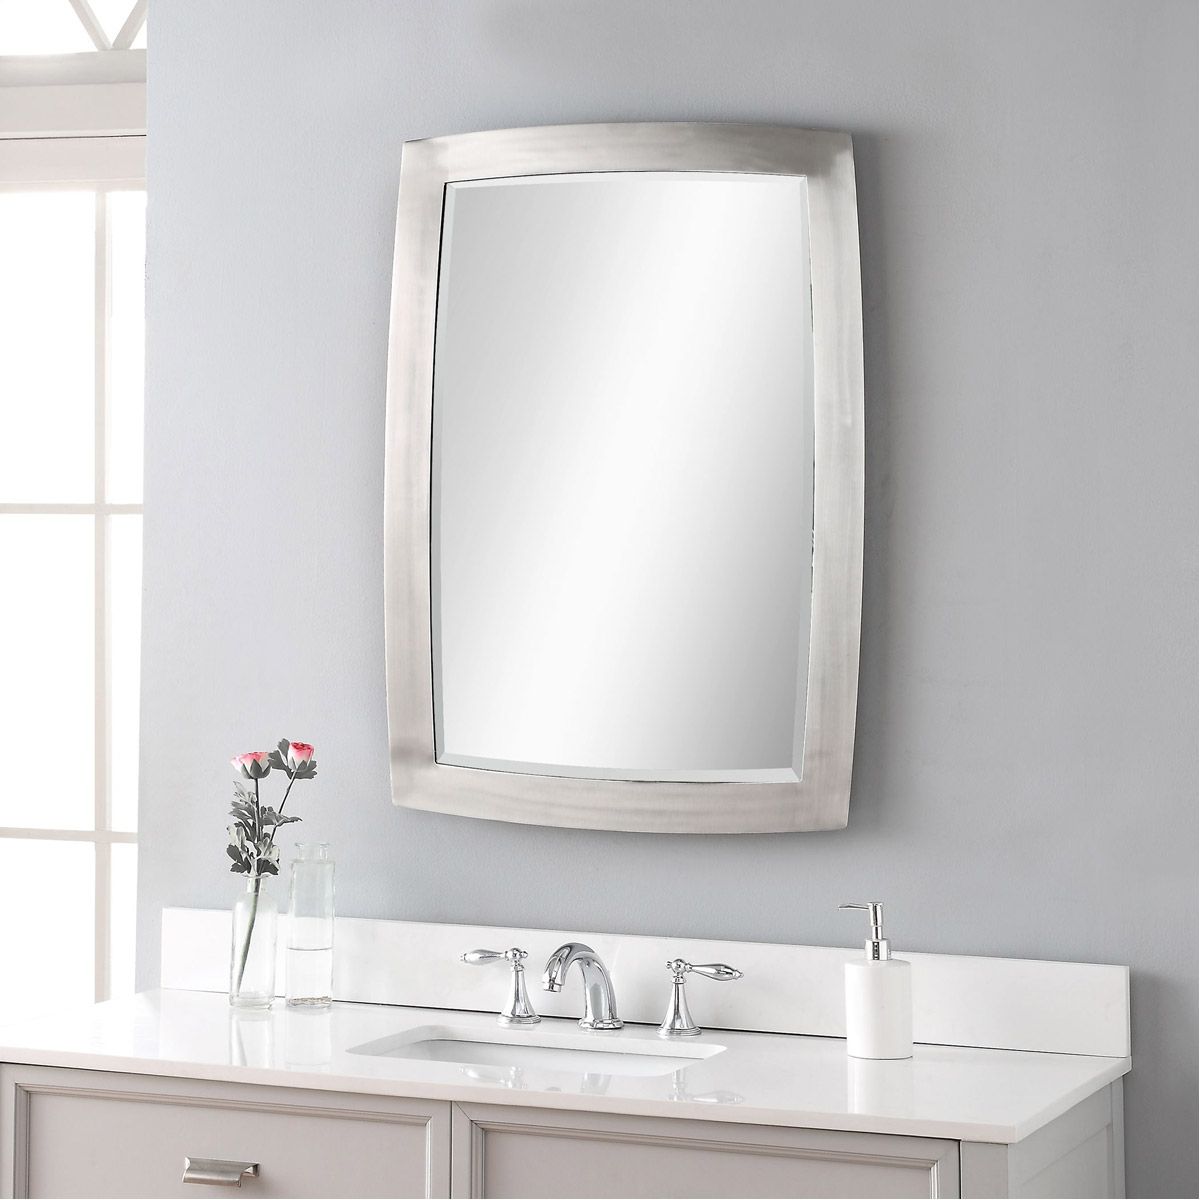 Uttermost 09618 Haskill 34 X 24 Inch Brushed Nickel Wall Mirror | Ebay Pertaining To Drake Brushed Steel Wall Mirrors (Photo 9 of 15)